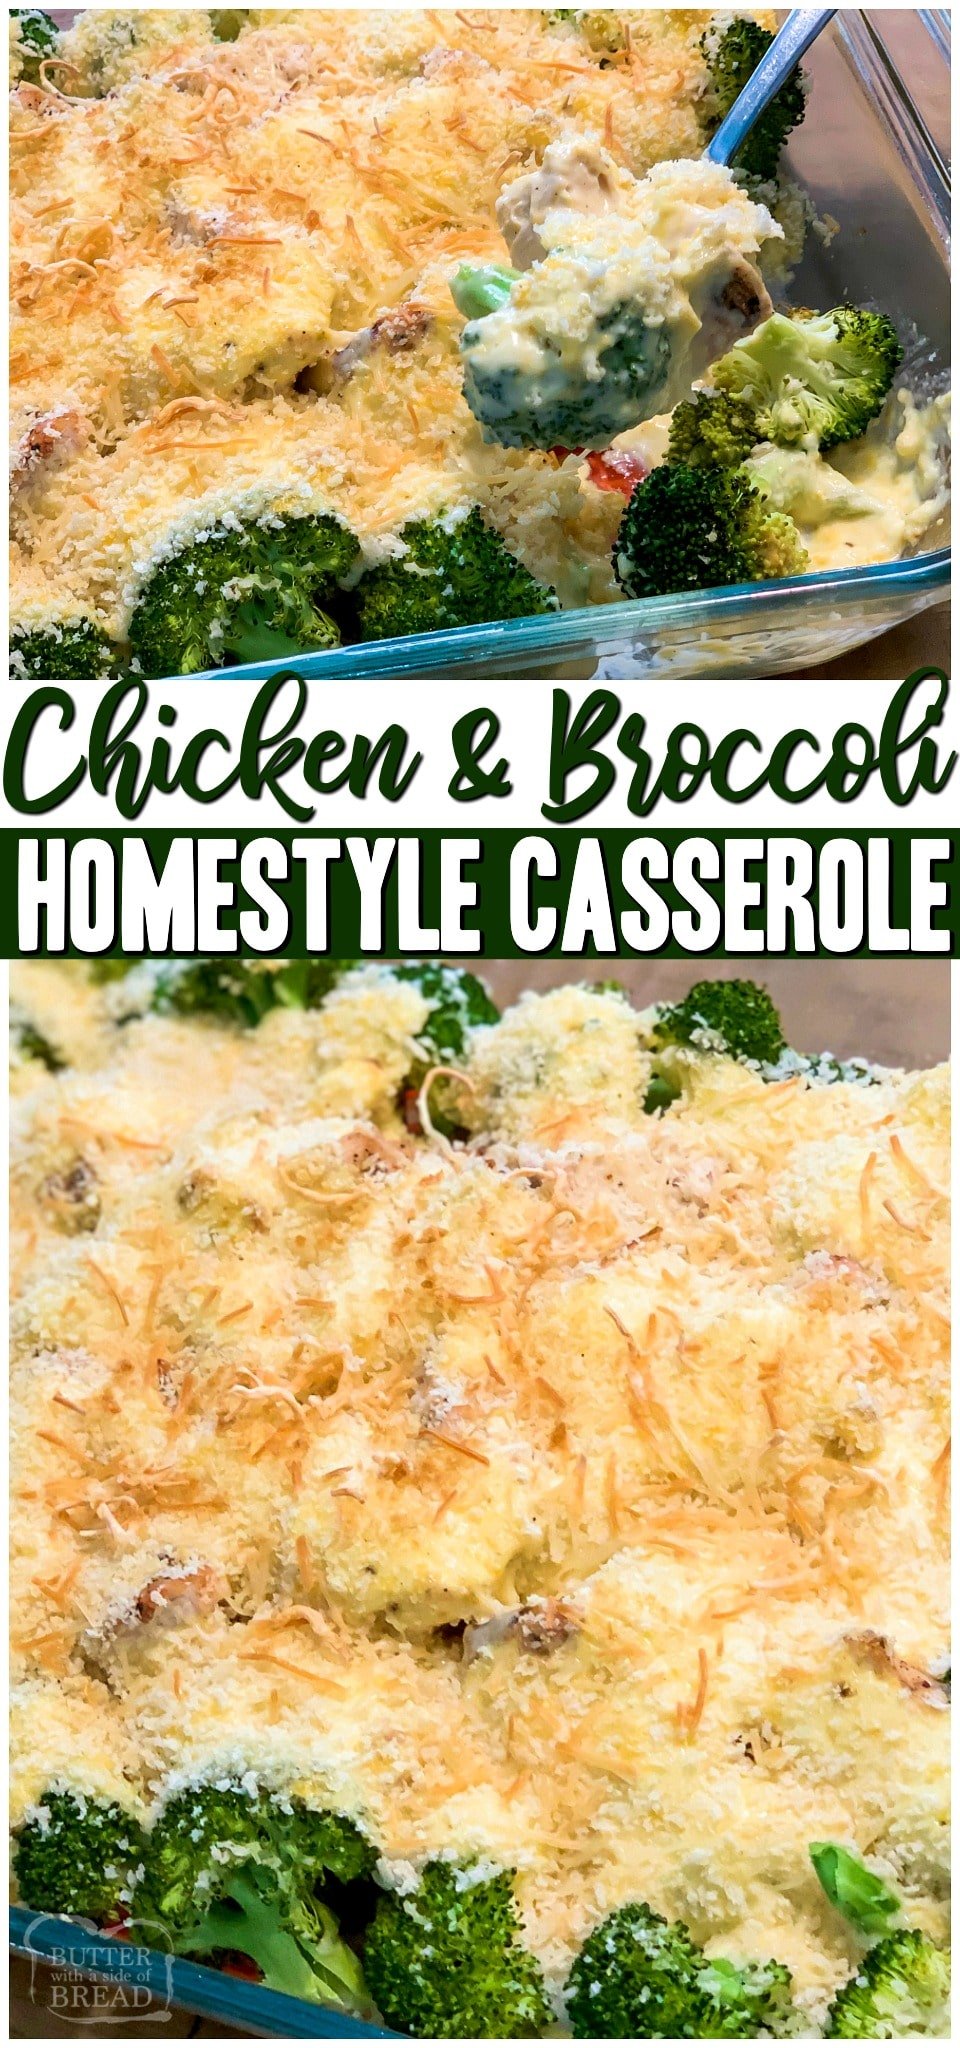 Chicken and Broccoli Casserole~ we're sharing our family recipe that's been passed down generations! Creamy cheese sauce mixed with delicious tender chicken and broccoli topped with buttery bread crumbs make it the perfect comfort food!